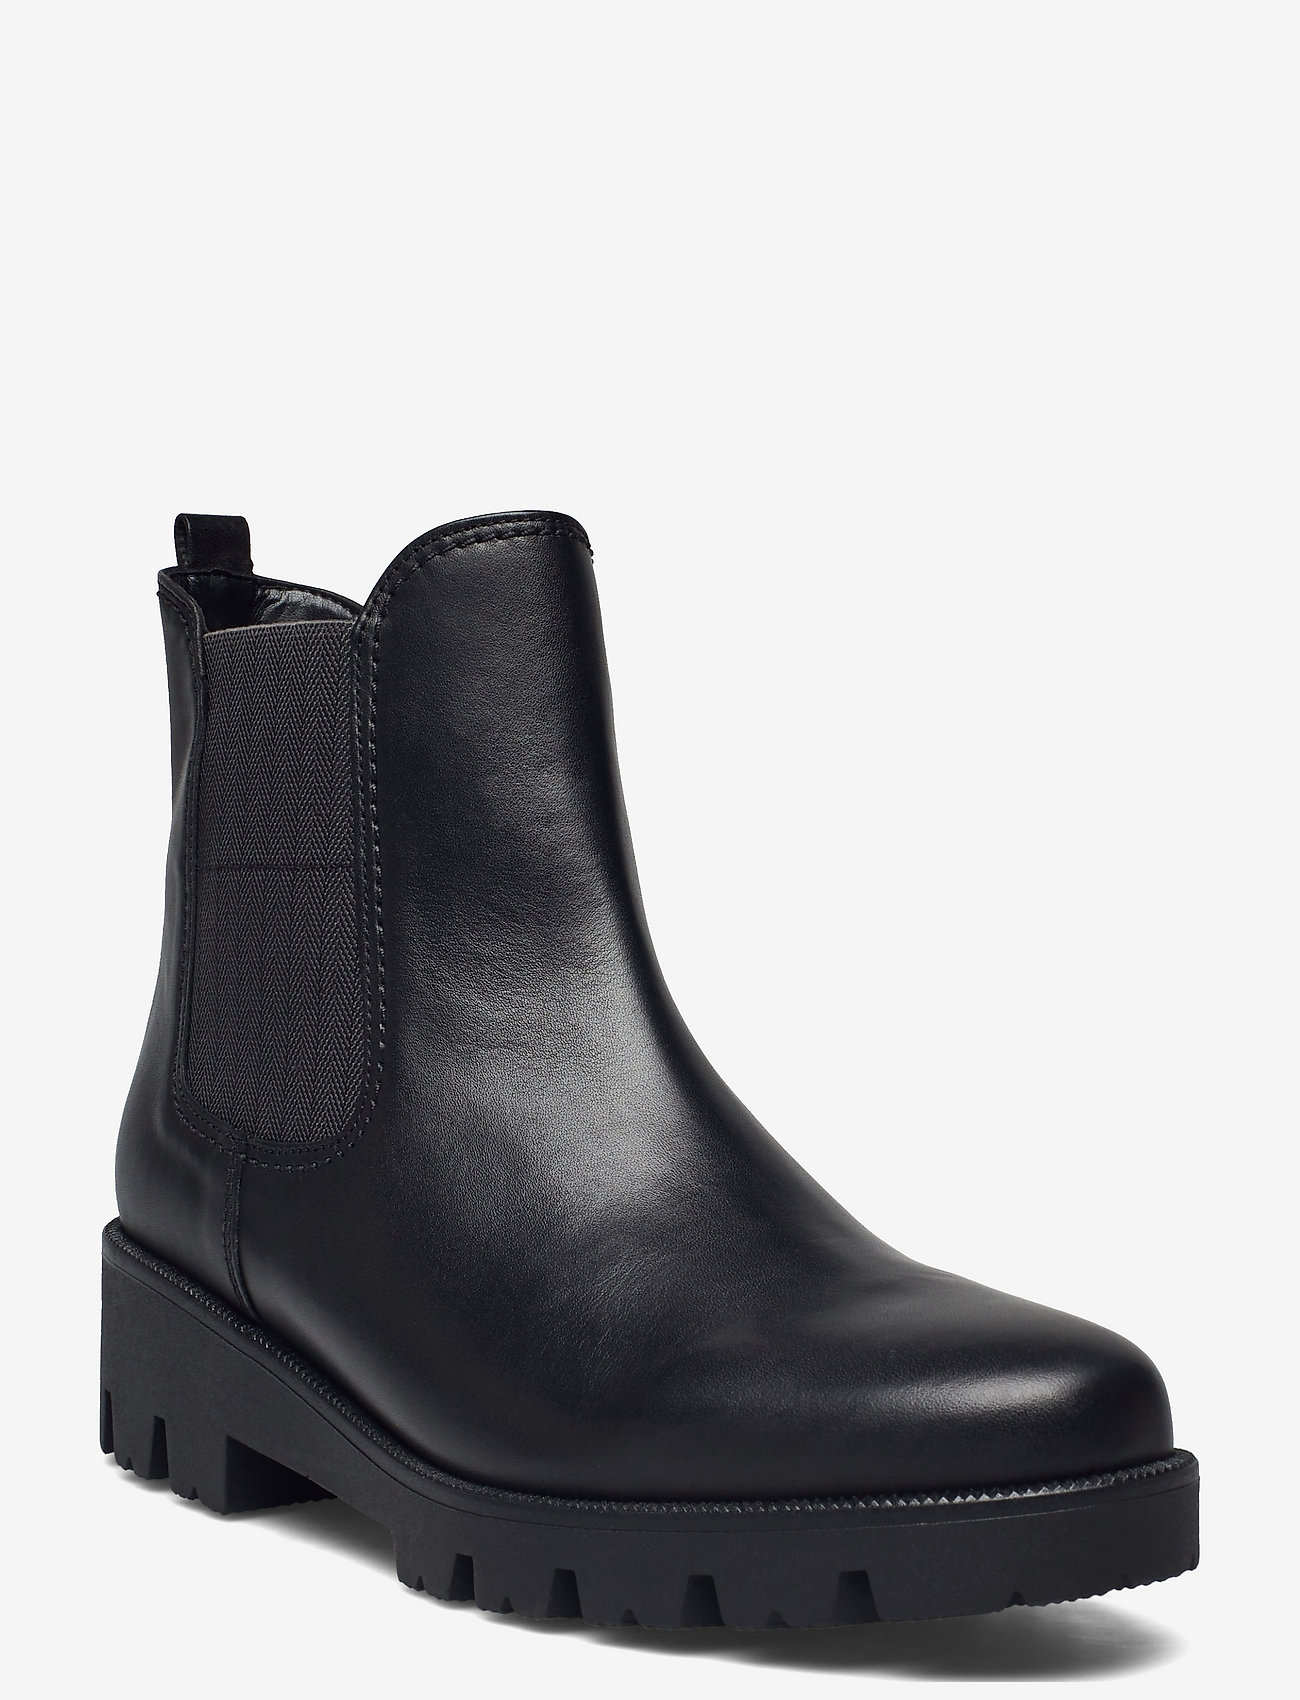 Gabor Ankle Boot - Chelsea boots | Boozt.com